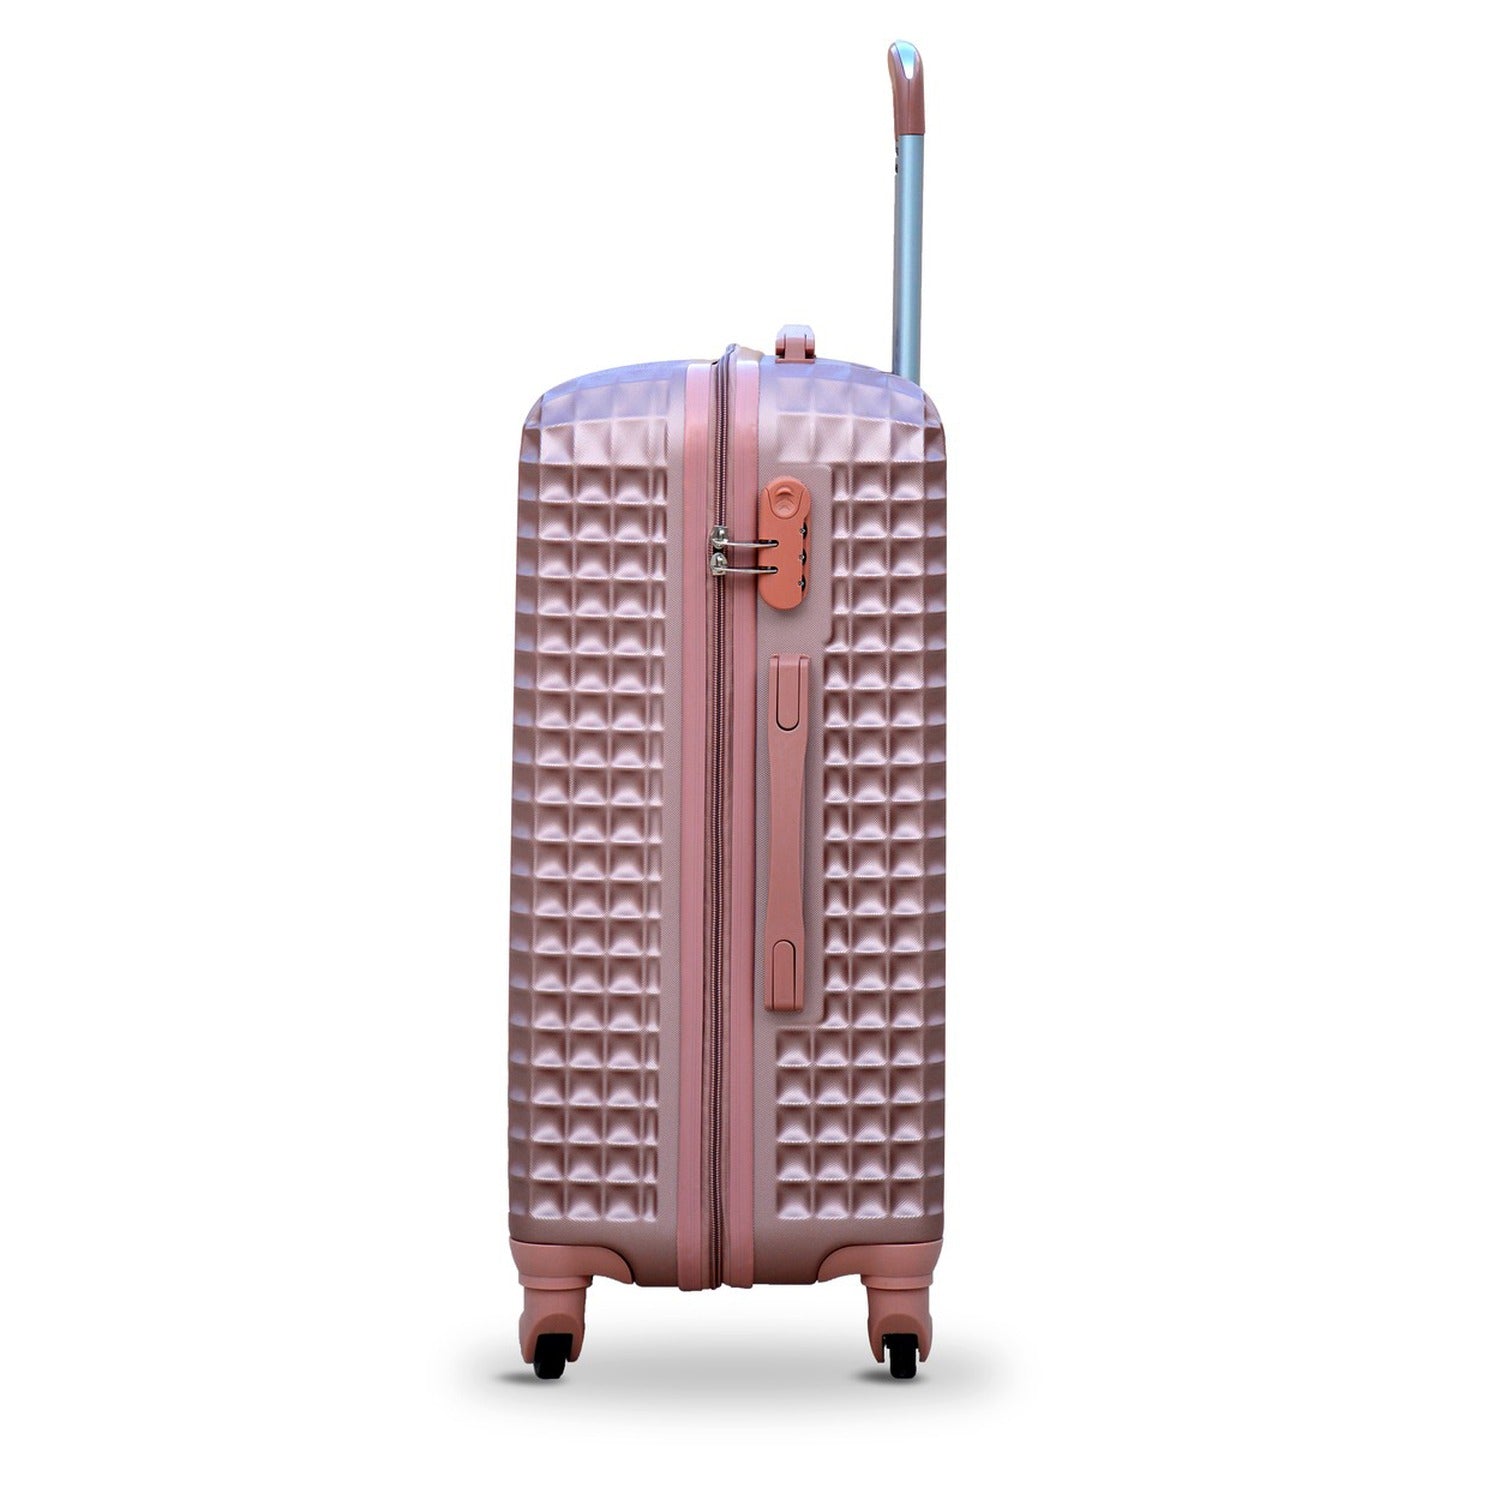 24" Rose Gold Colour Square Cut ABS Luggage Lightweight Hard Case Trolley Bag | 2 Year Warranty